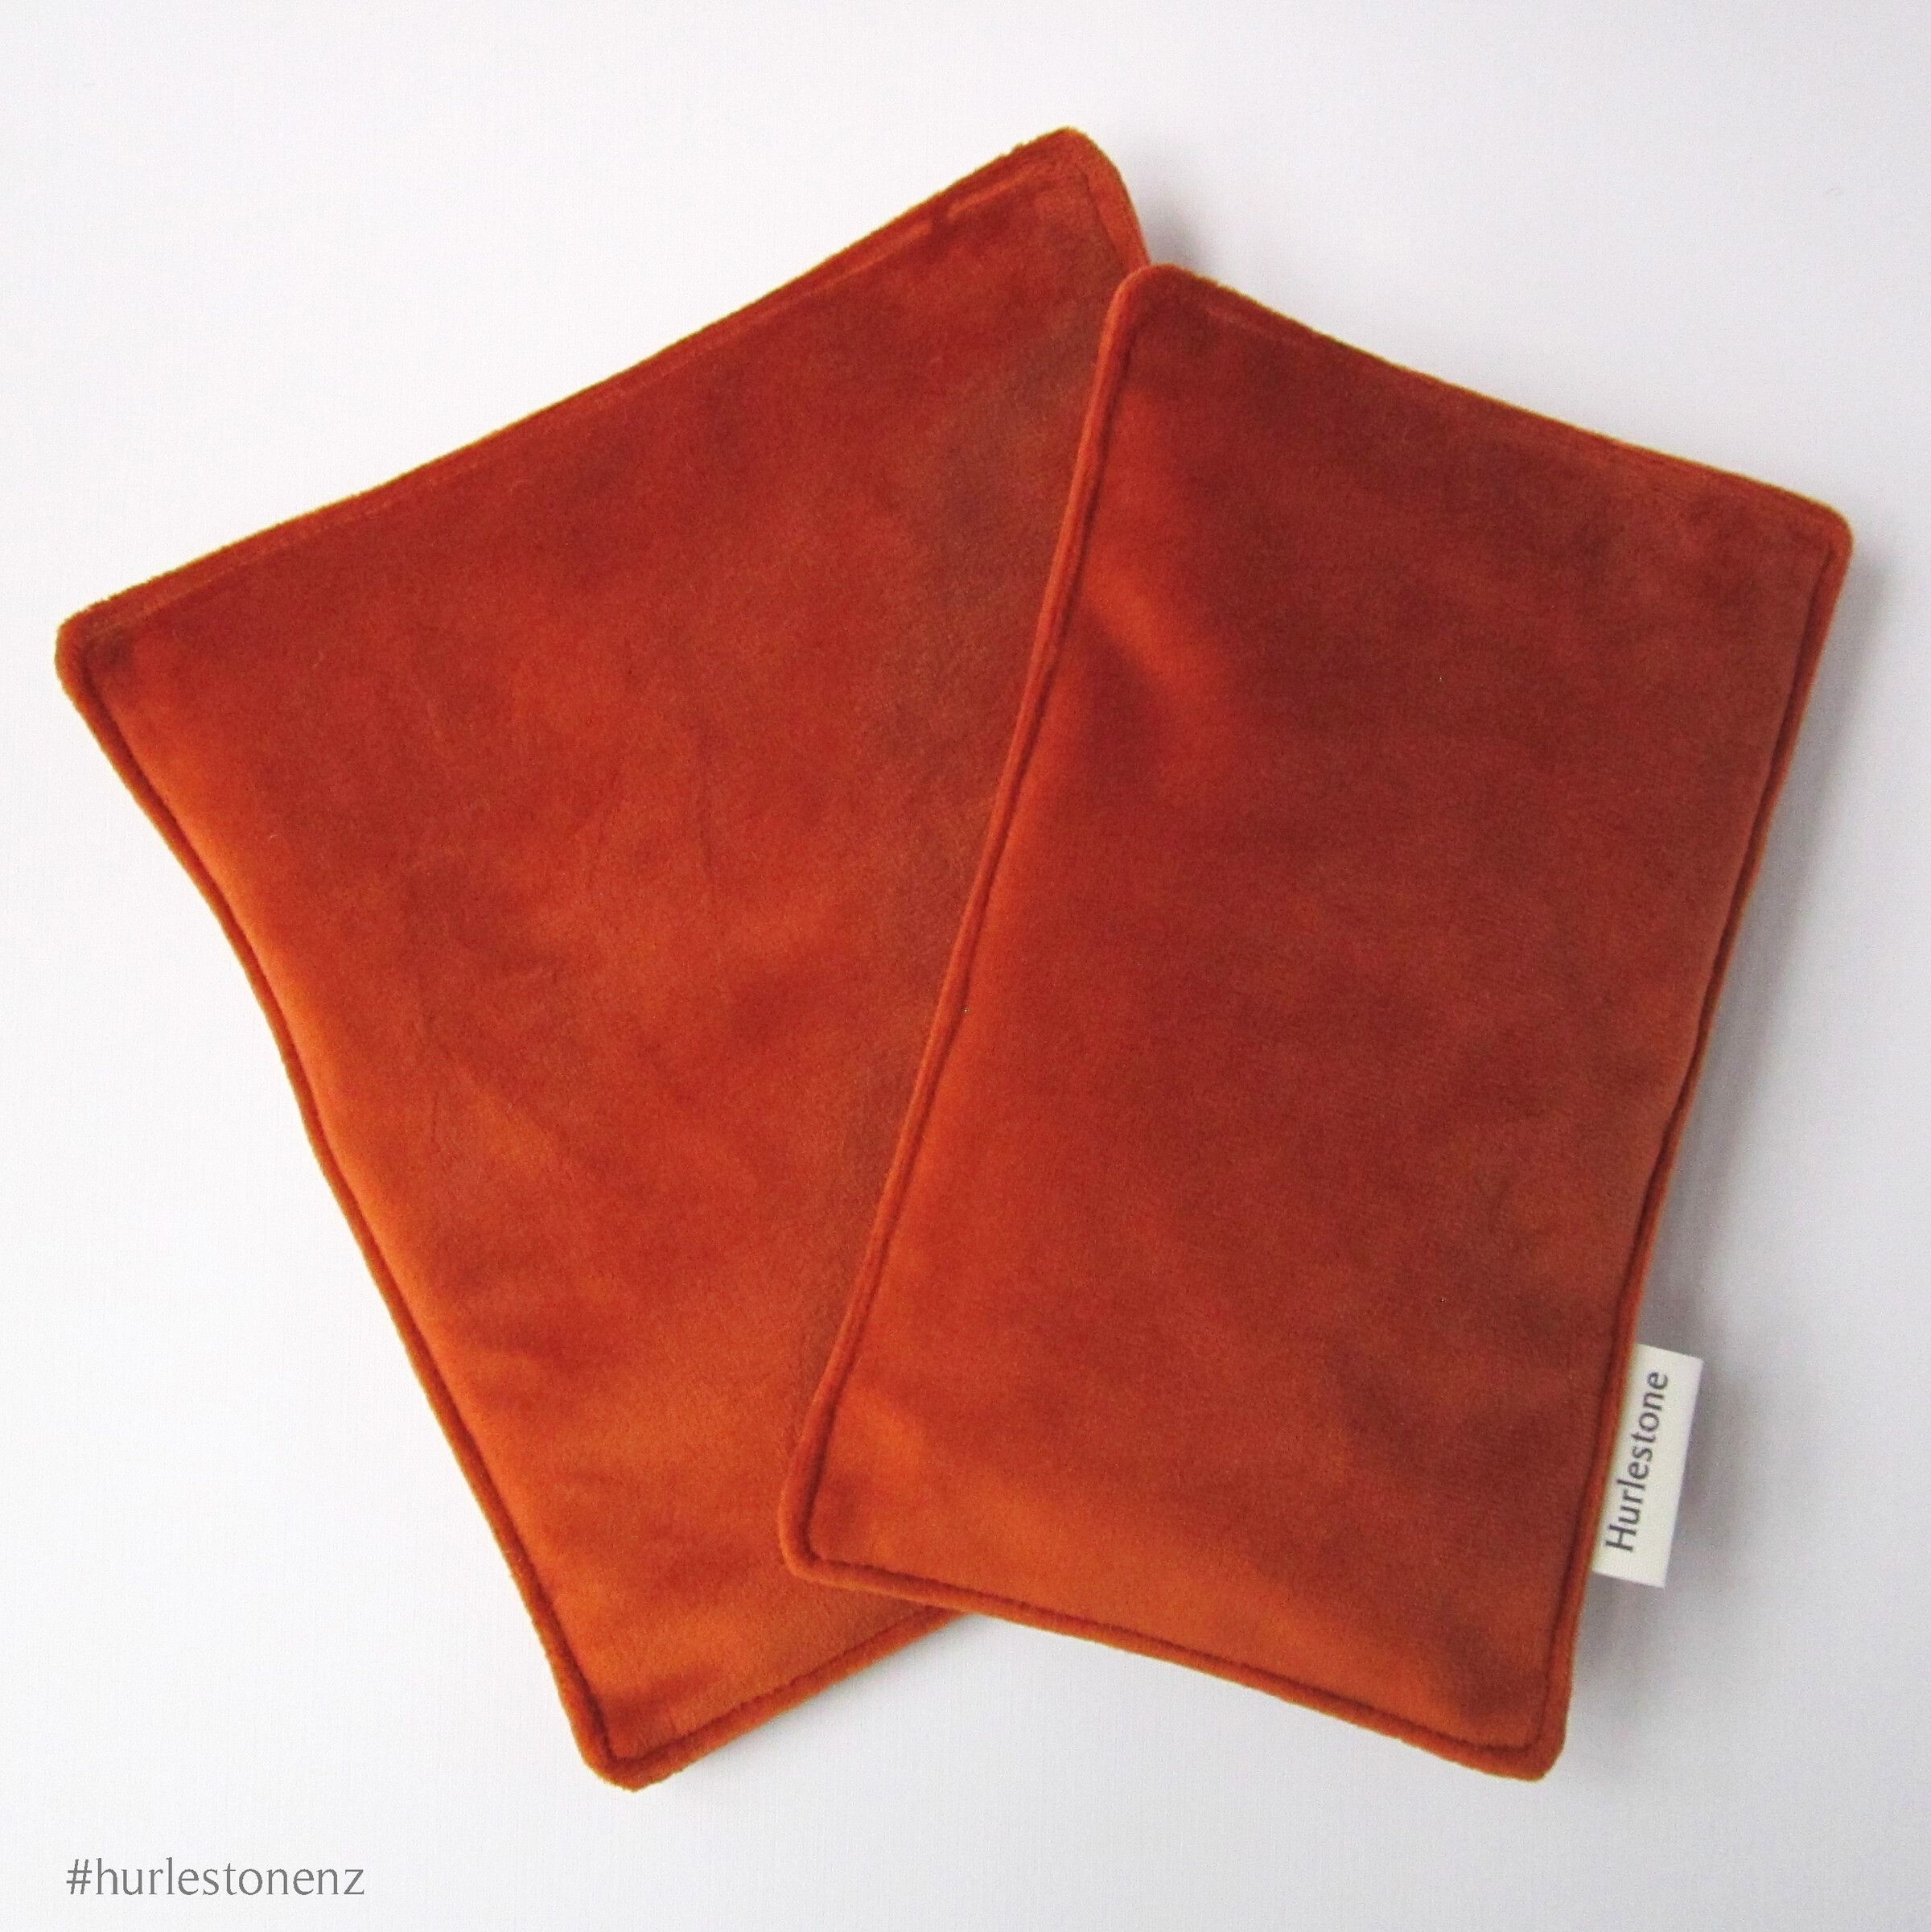 Rust Pen Pillow - Small/Large from NZ$16.00